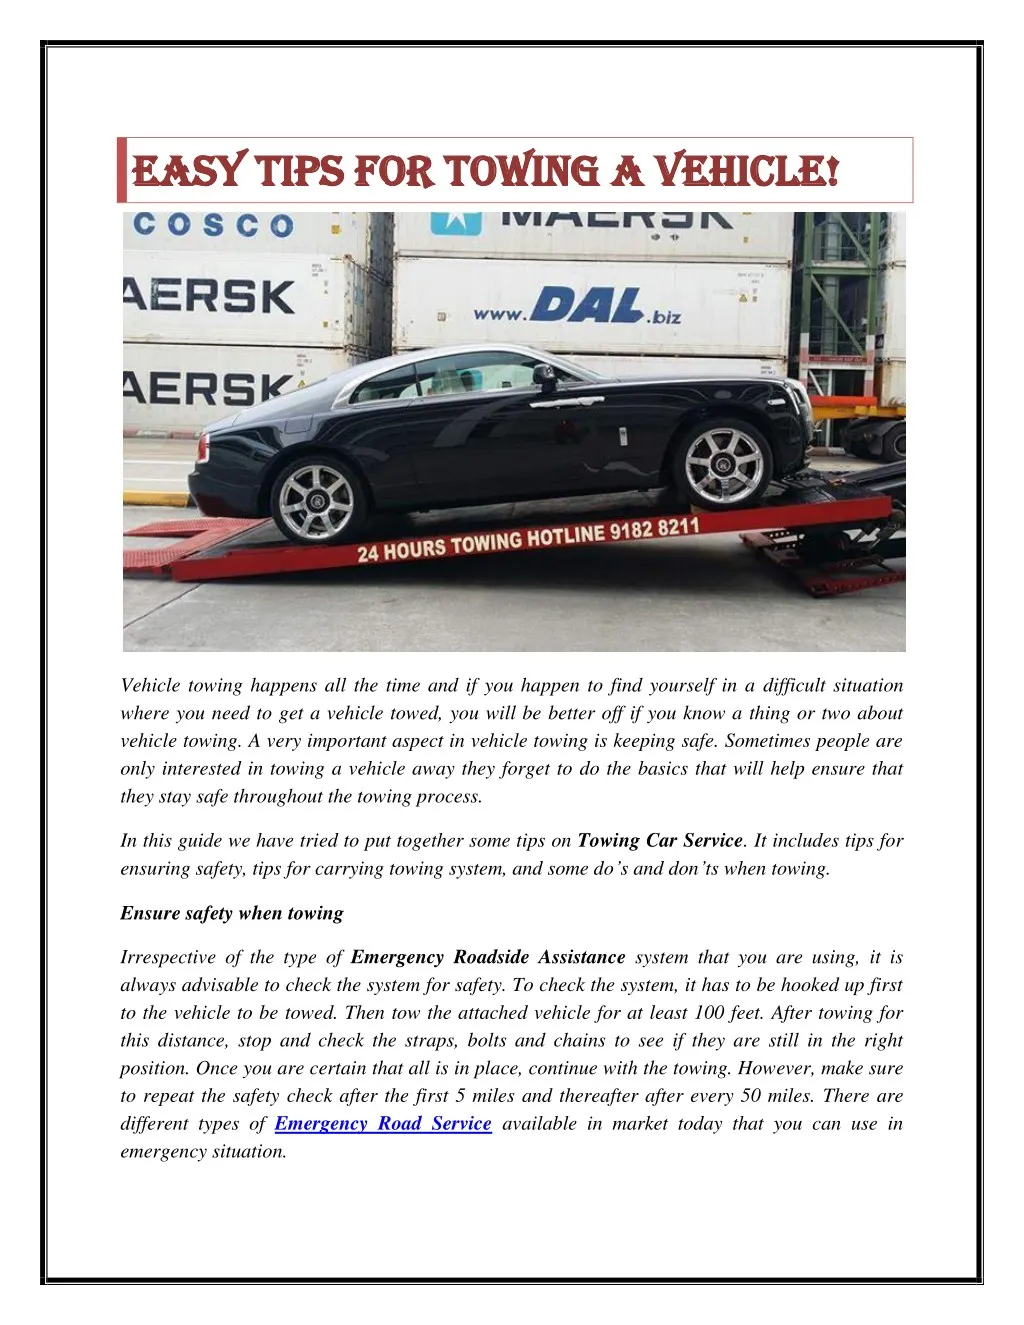 eas easy y tips for to tips for towing a